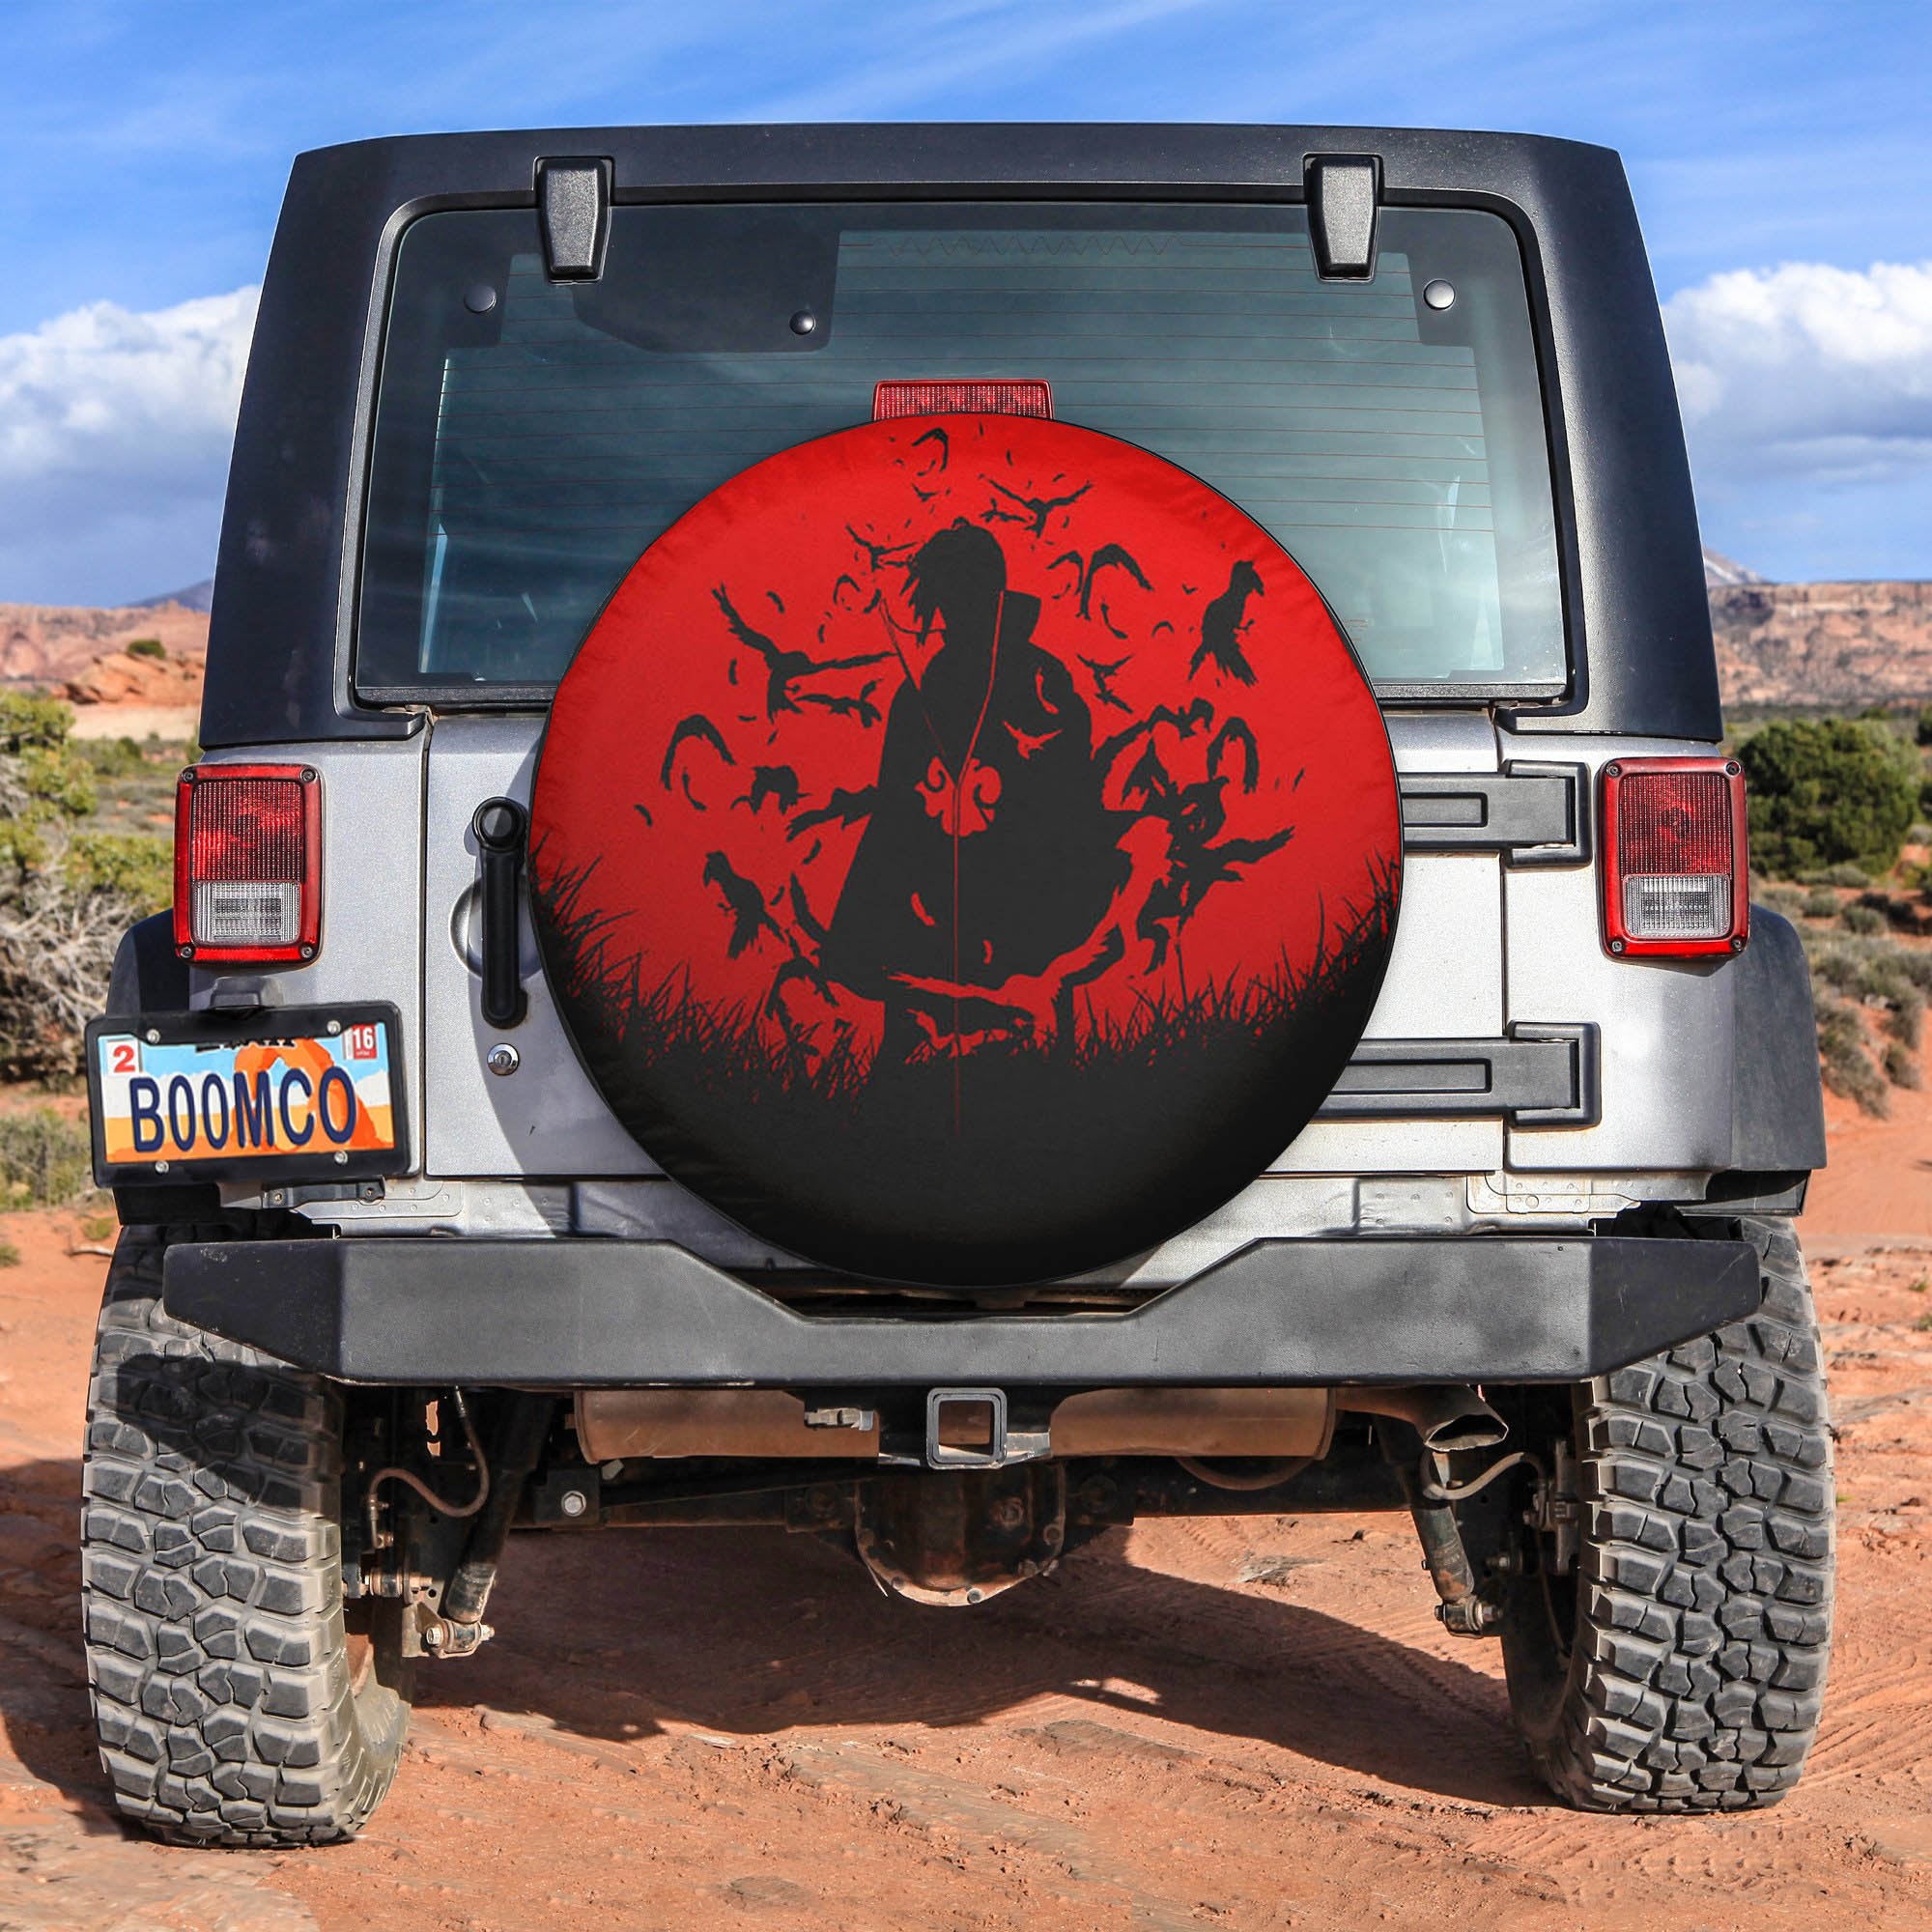 Uchiha Itachi Shadow Spare Tire Covers Gift For Campers